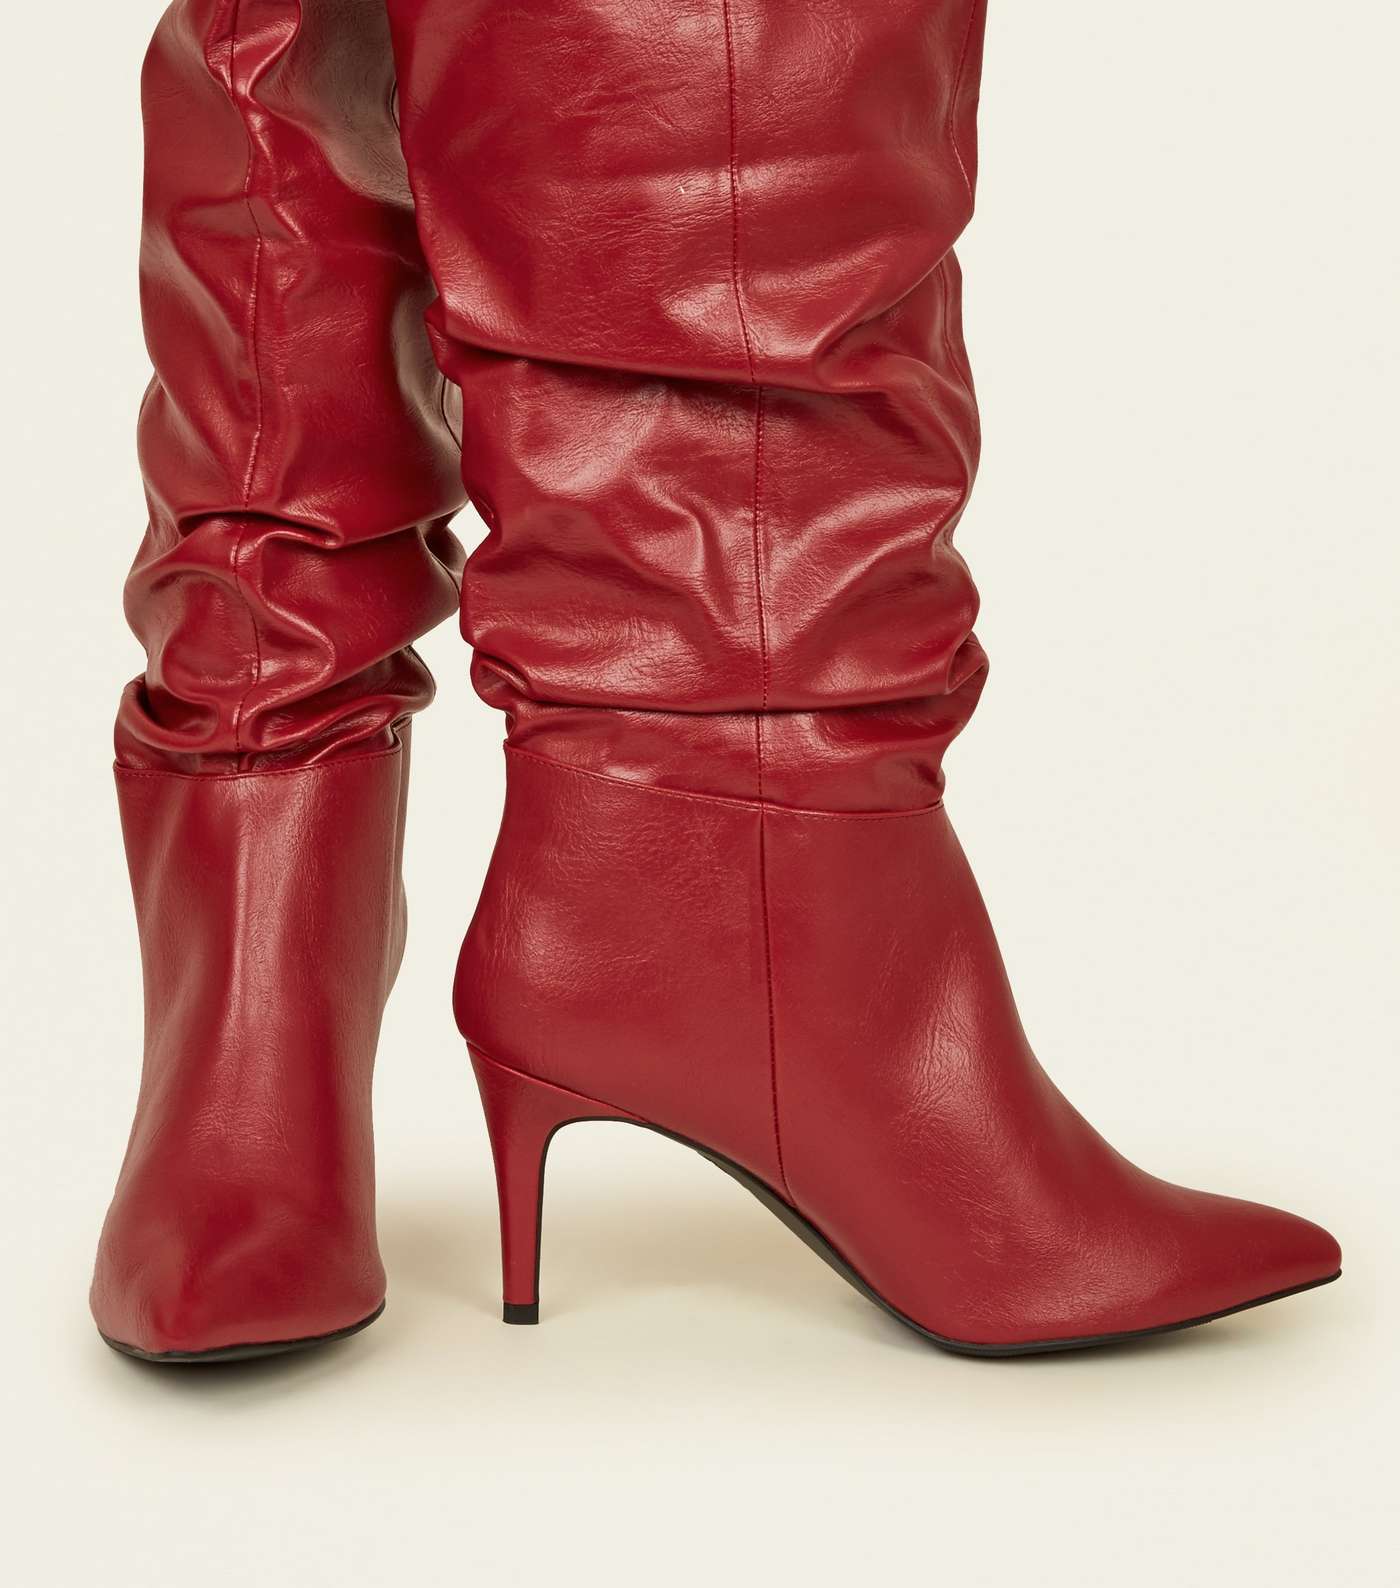 Red Leather-Look Knee High Stiletto Slouch Boots Image 4